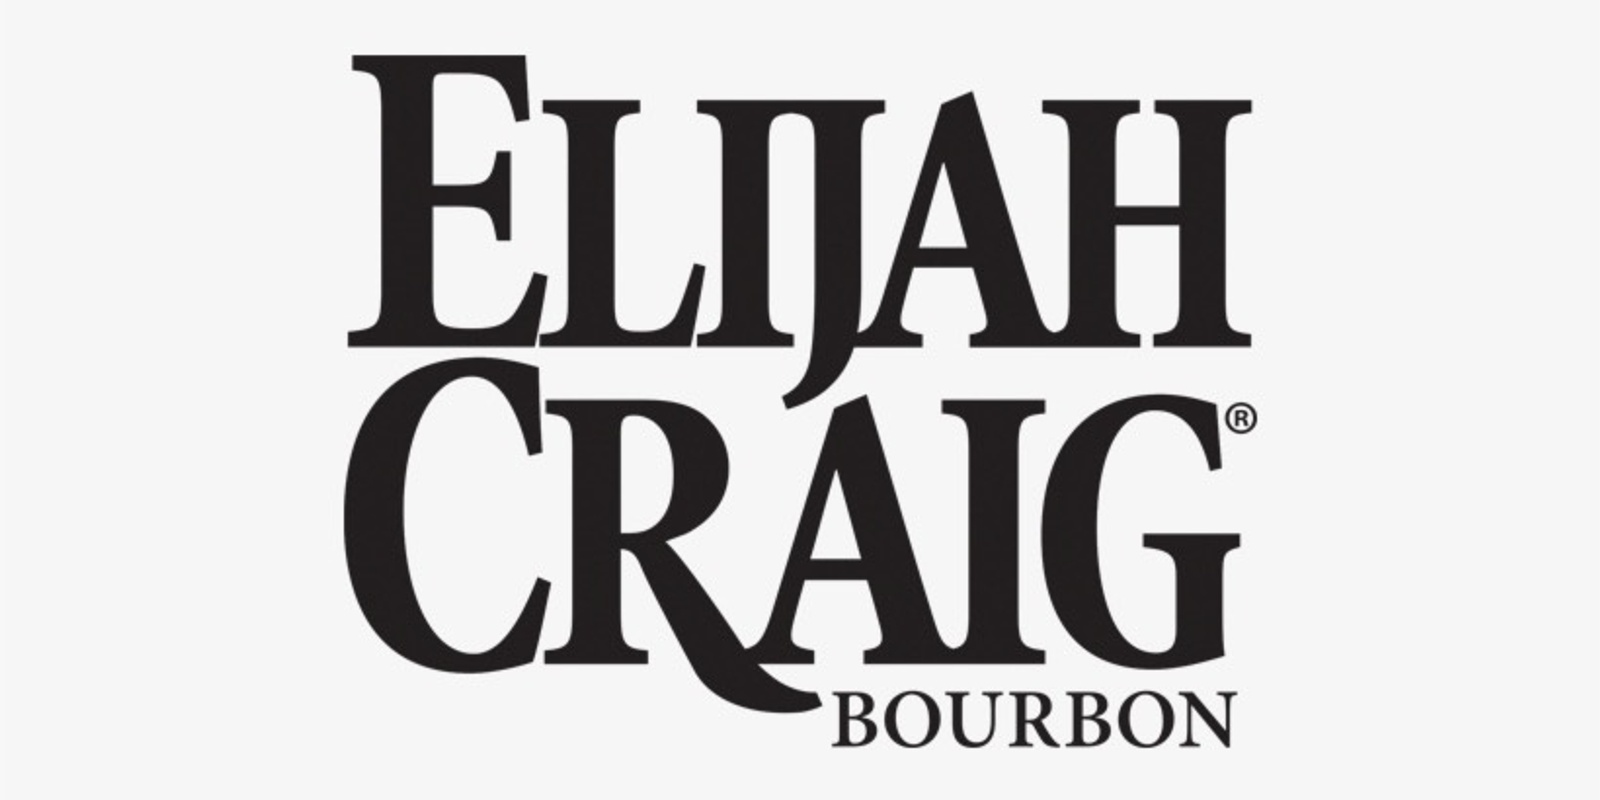 Banner image for Tee Off with Dad - A Father's Day Elijah Craig Whiskey Tasting